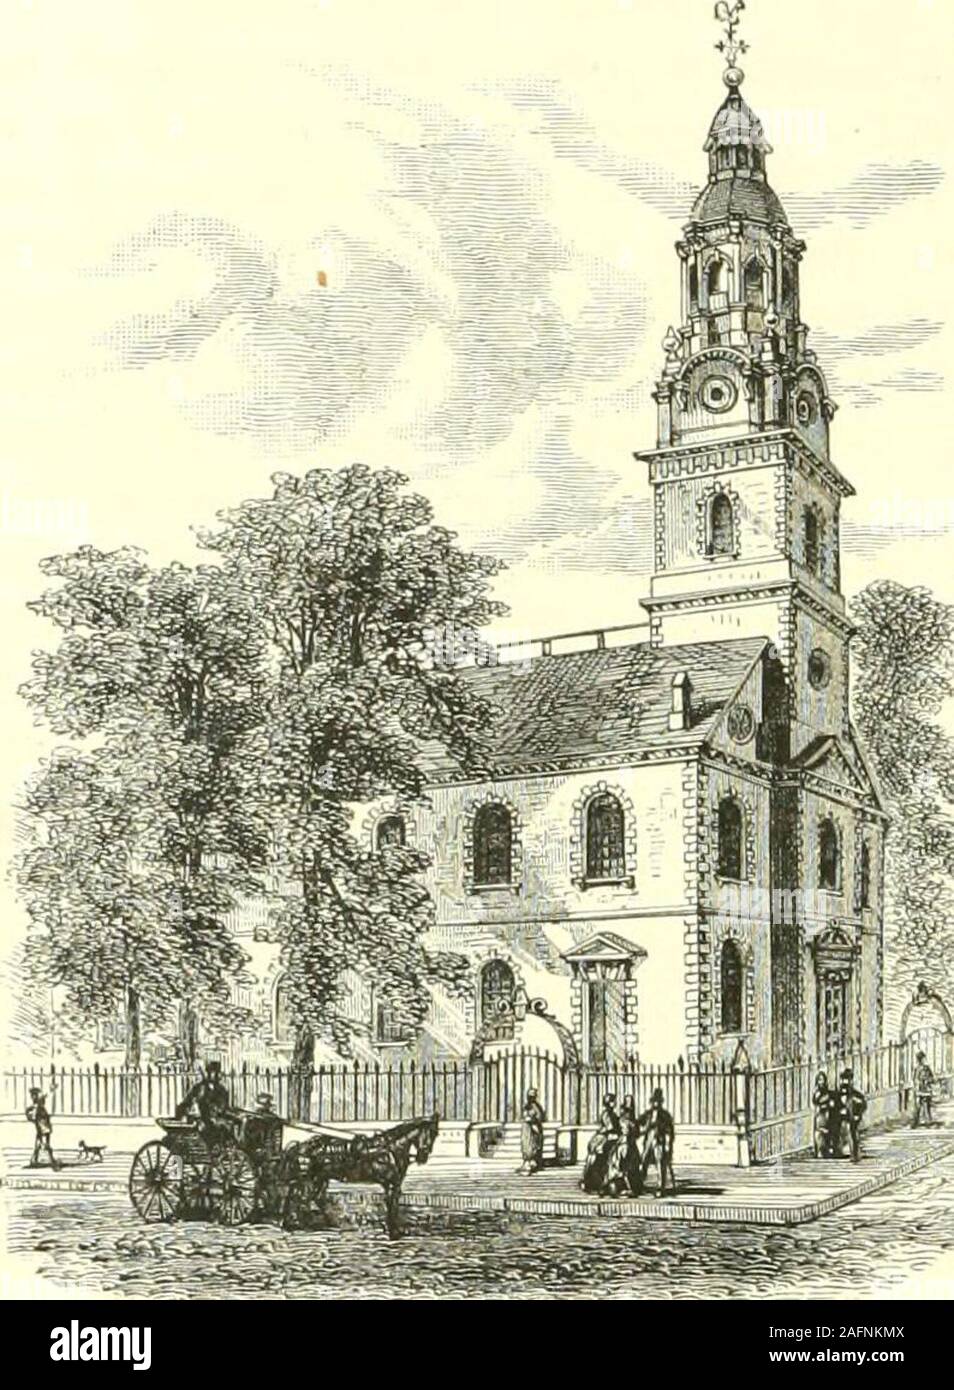 . History of the city of New York : its origin, rise, and progress. and was the rival in architecturalpretensions of St. Pauls Chapel. It was located on Fulton (Fair) Street,then quite out of town.^ The Eev. Dr. John Henry Livingston was called to the pulpit the next year.He was young, scarcelytwenty-six years of age, ofsingular personal beauty,tall, athletic, and a pro-ficient in manly exercises.He had been graduatedfrom Yale at sixteen, aftera rigorous examinationnot only in the classics,but astronomy, mathe-matics, and jurisprudence;and he had traveled overEurope, stuilied tlieologyin Utrec Stock Photo